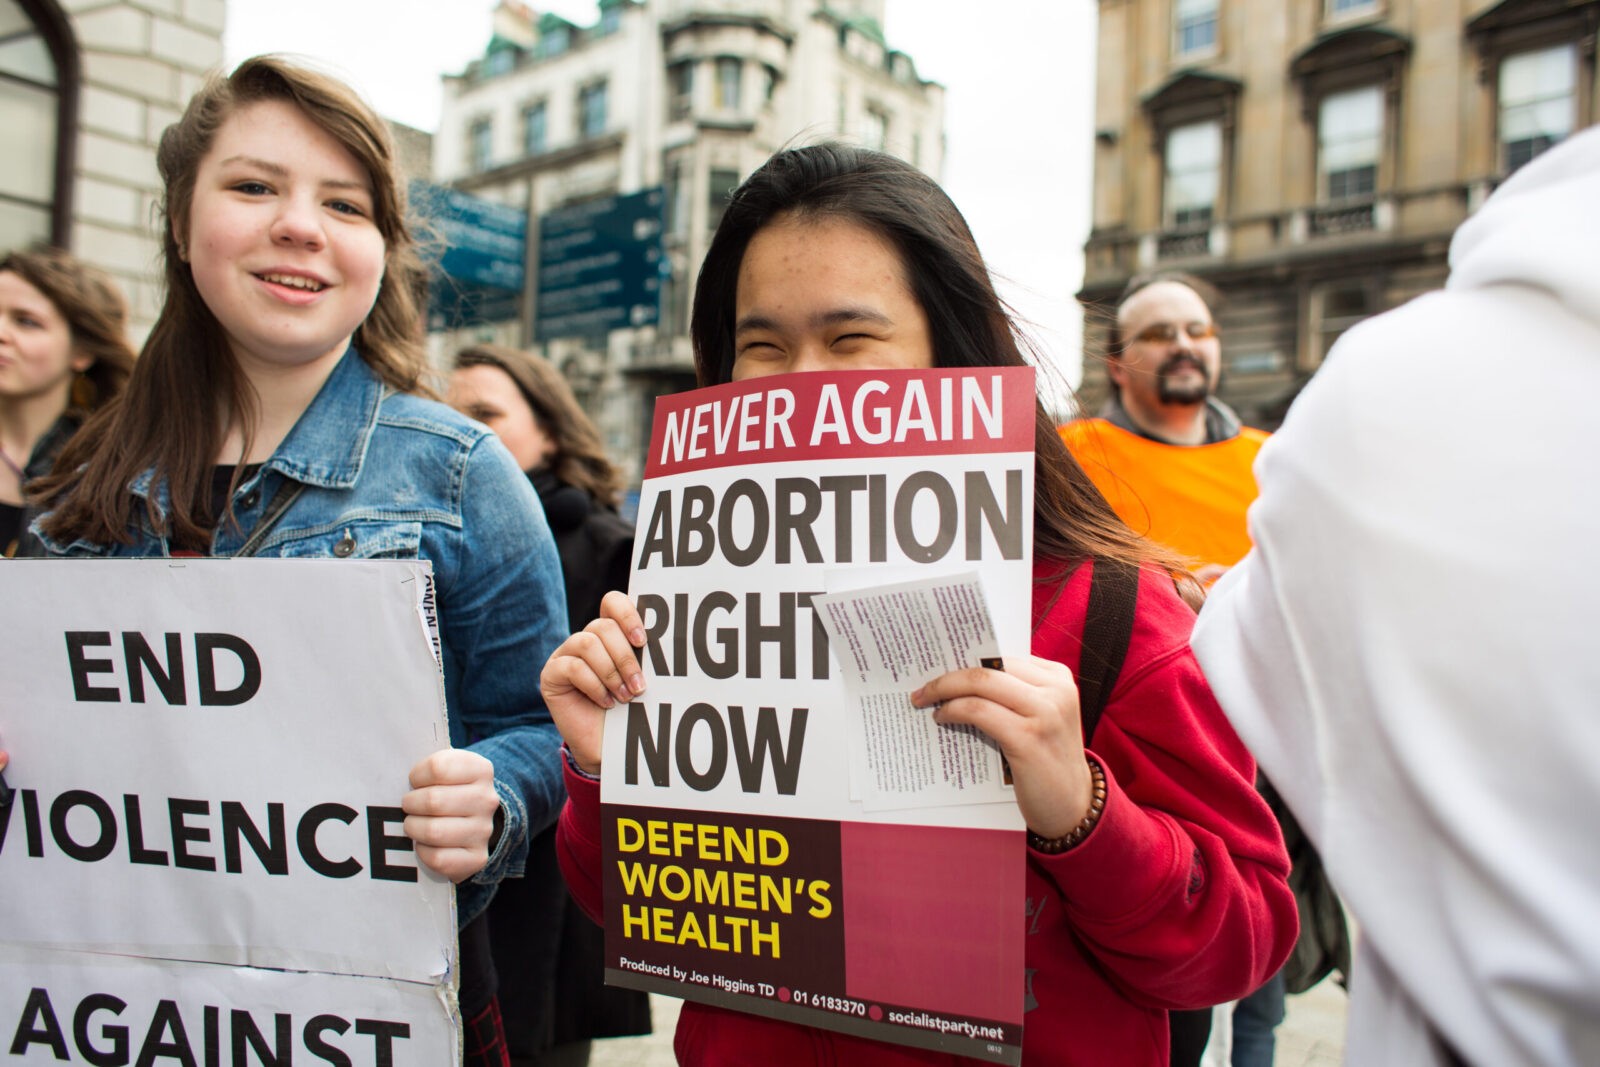 Young girl hiding behind the poster regarding abortion rights